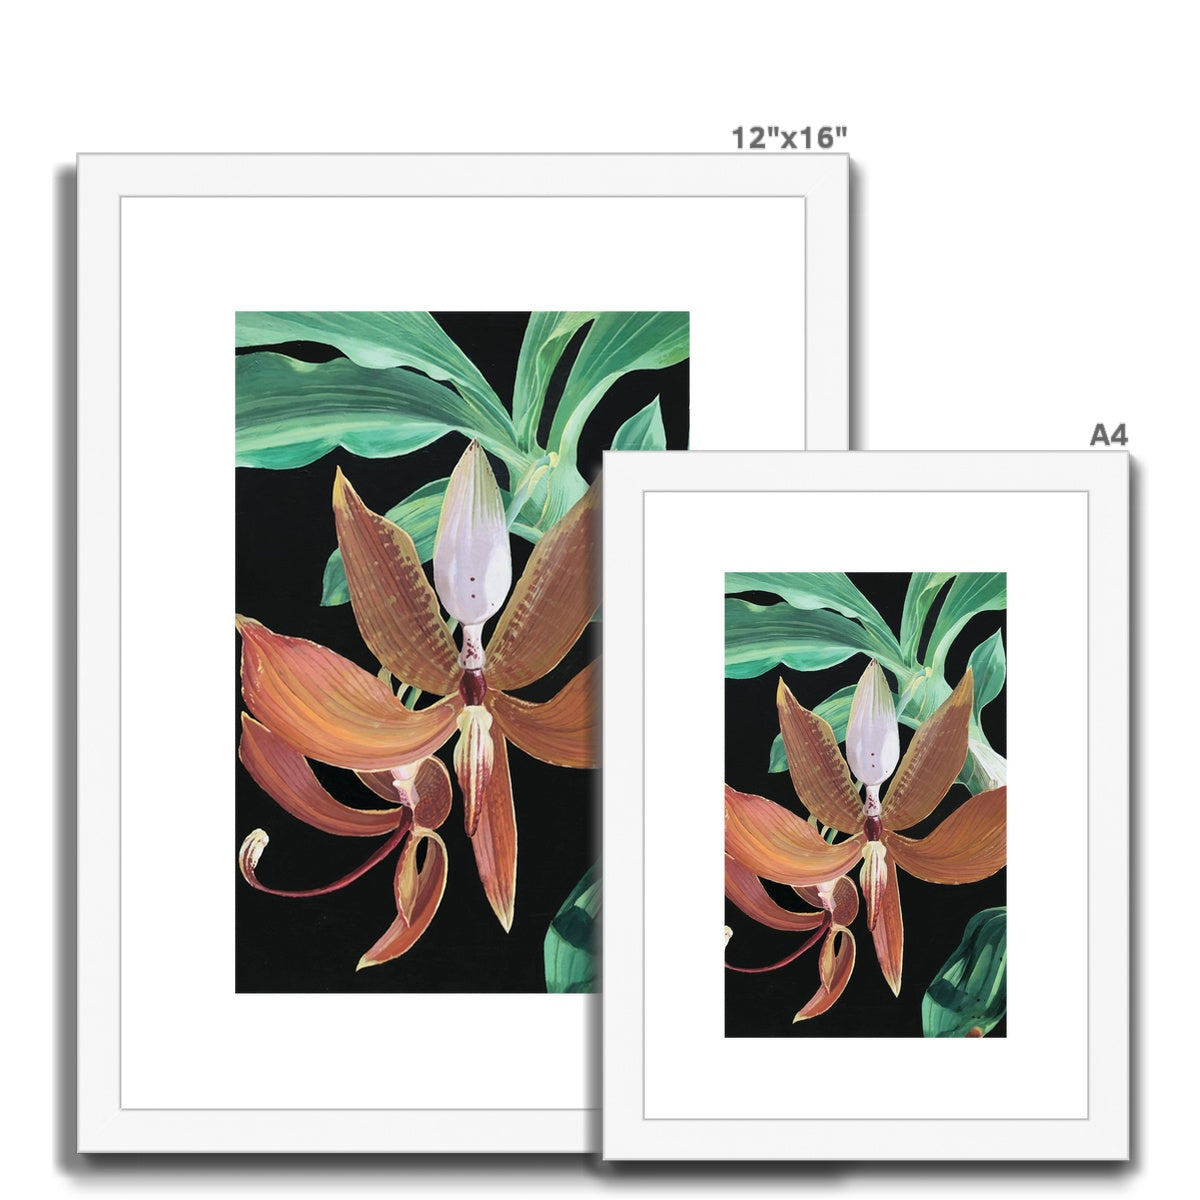 Cycnoches orchid Framed & Mounted Print.